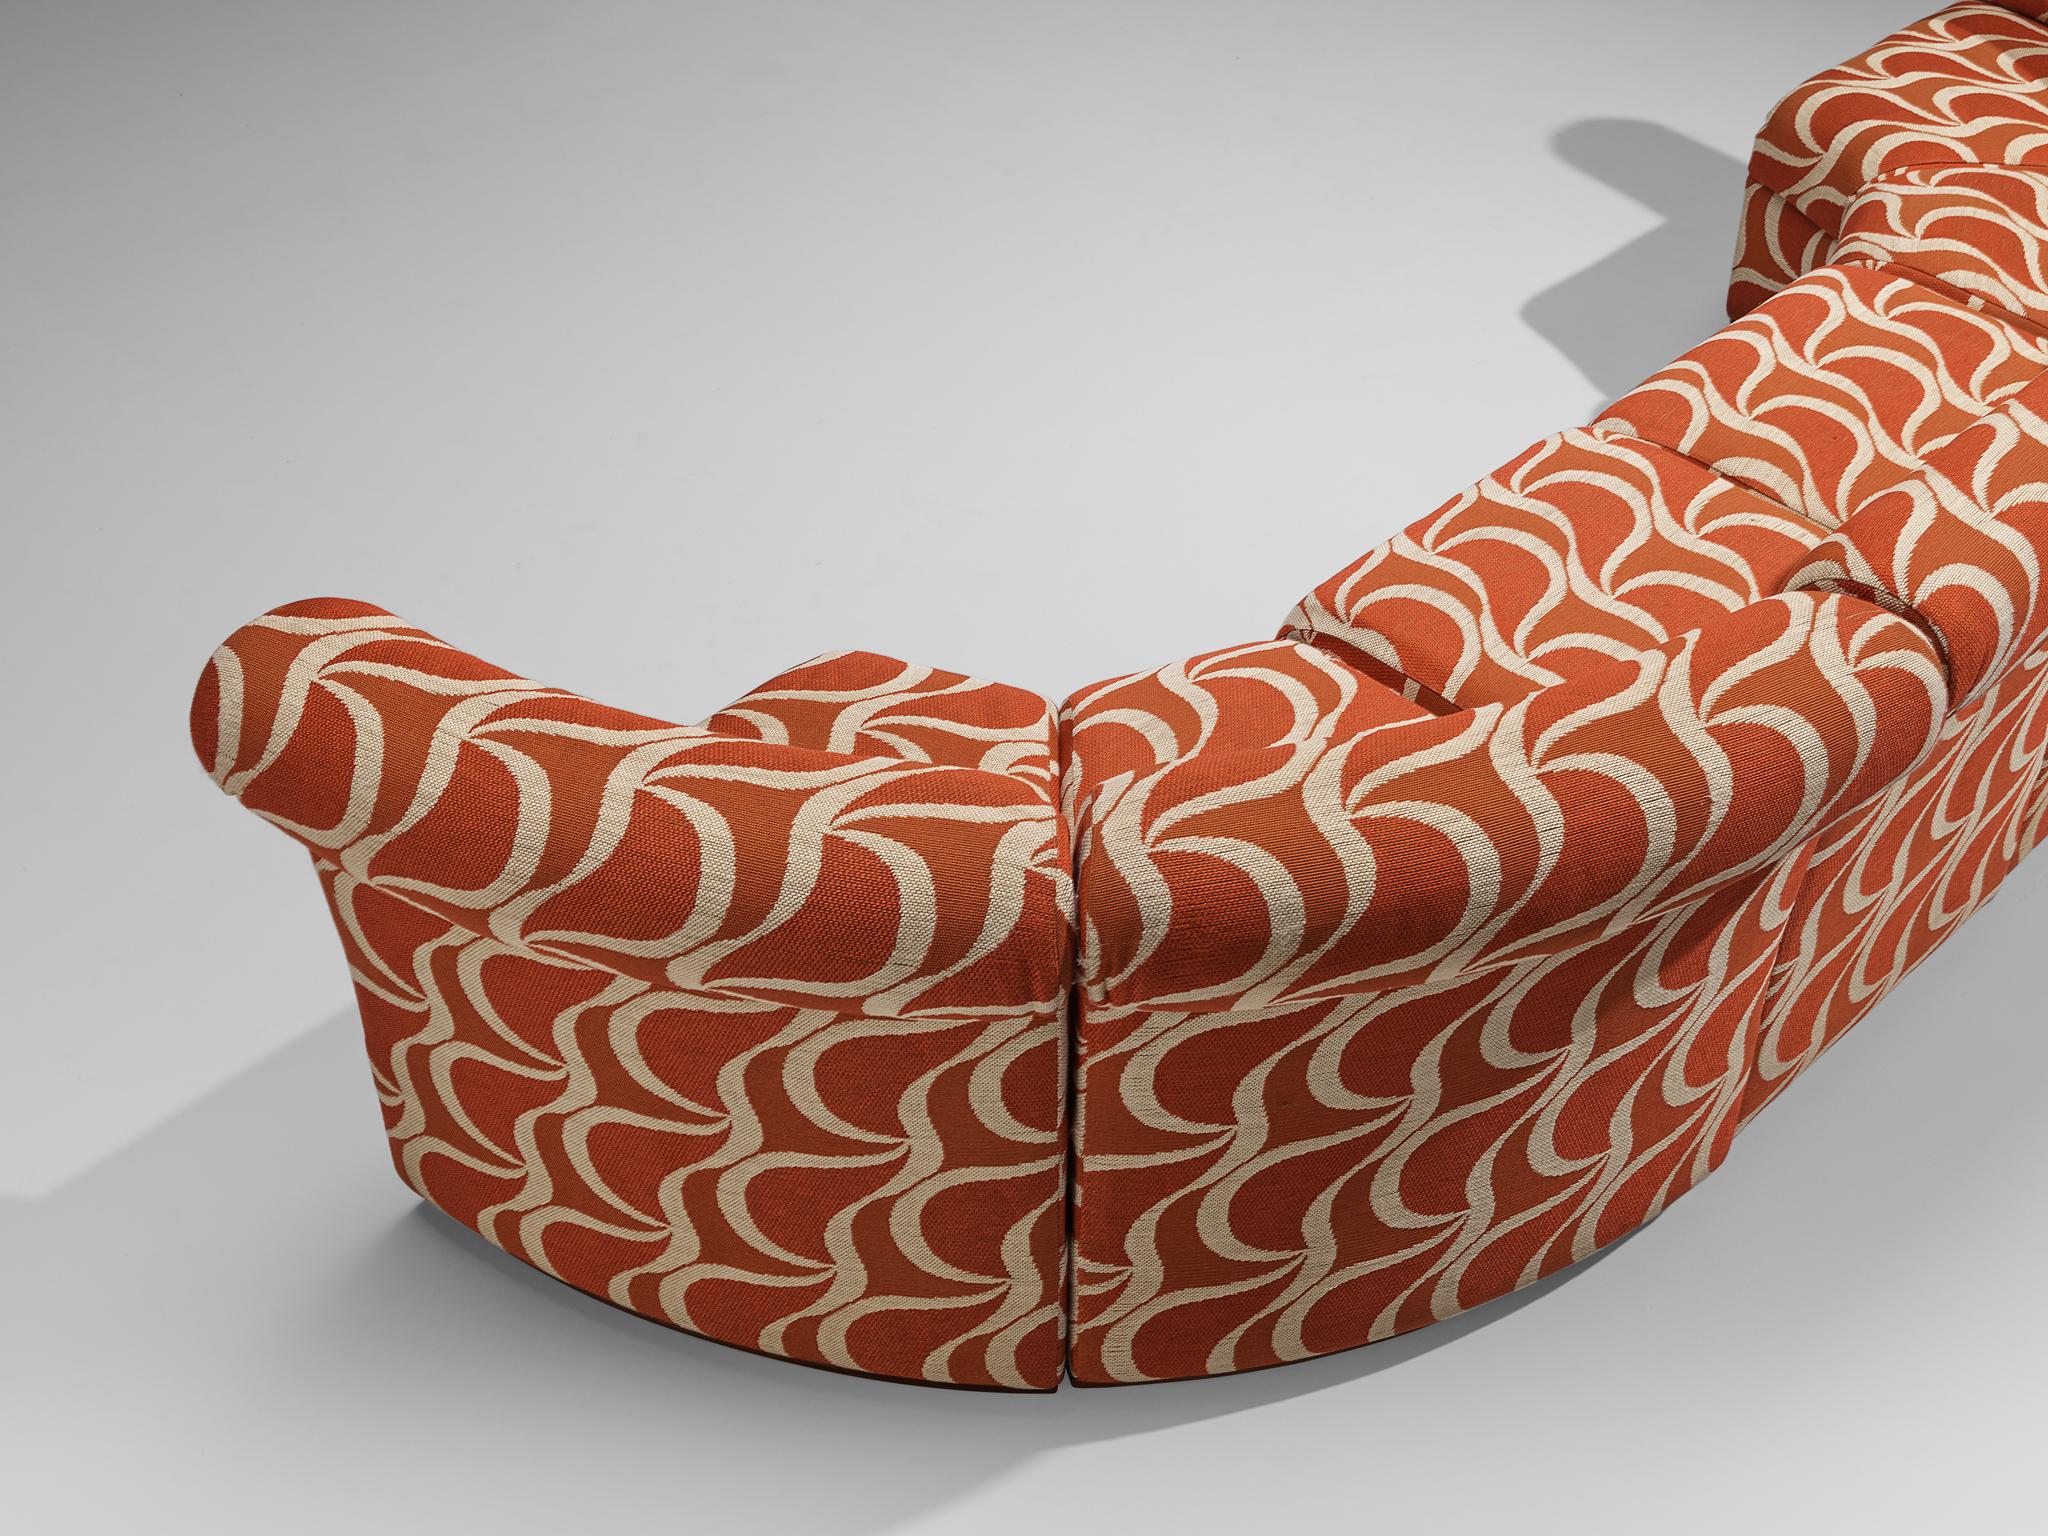 Italian Sectional Sofa in Red Orange Patterned Upholstery 1